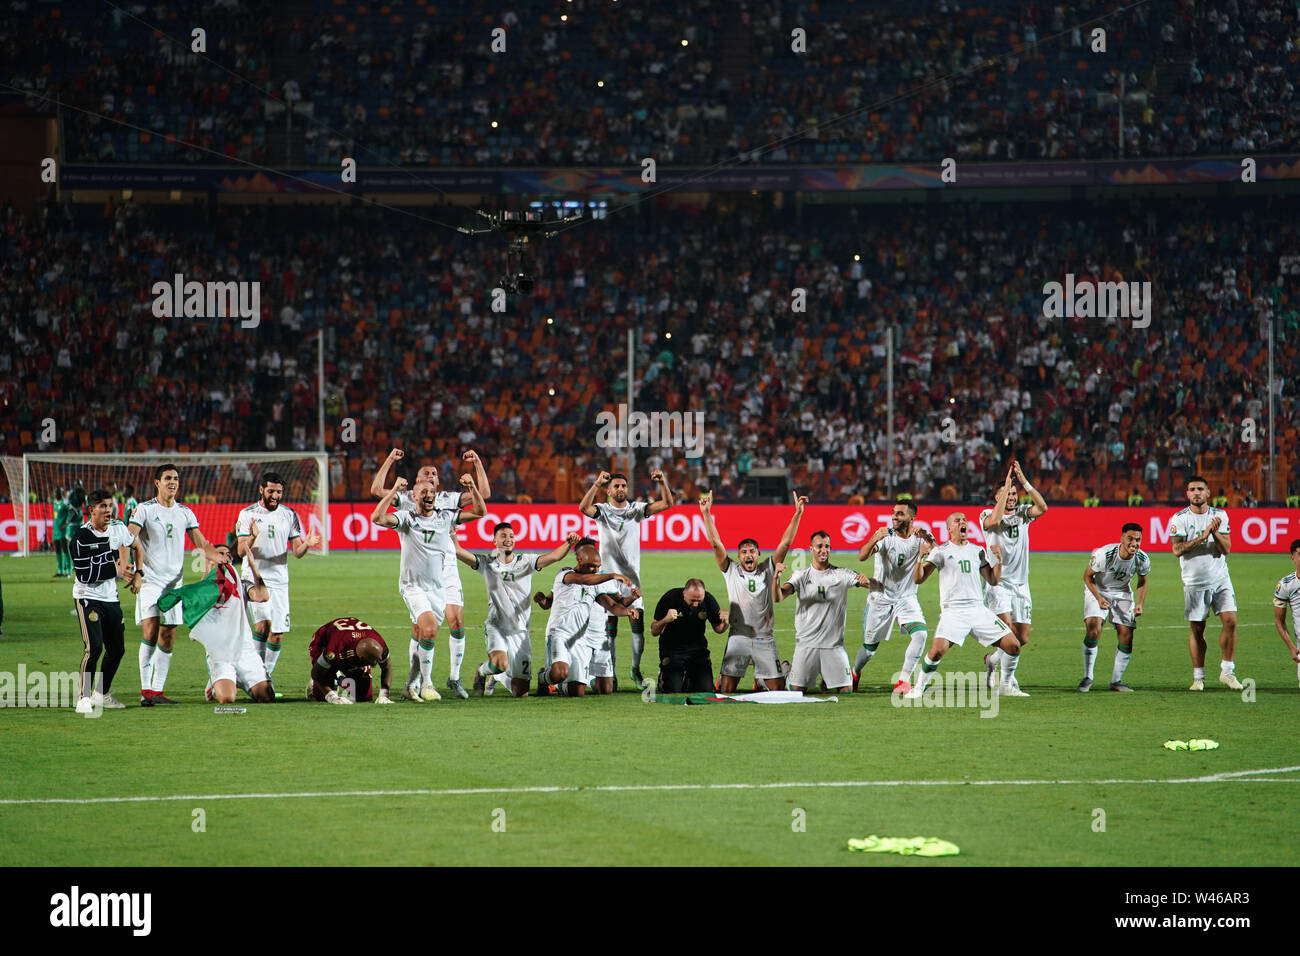 Cairo, Algeria, Egypt. 19th July, 2019. FRANCE OUT July 19, 2019: Algerian Team celebrating winning after the Final of 2019 African Cup of Nations match between Algeria and Senegal at the Cairo International Stadium in Cairo, Egypt. Ulrik Pedersen/CSM/Alamy Live News Stock Photo